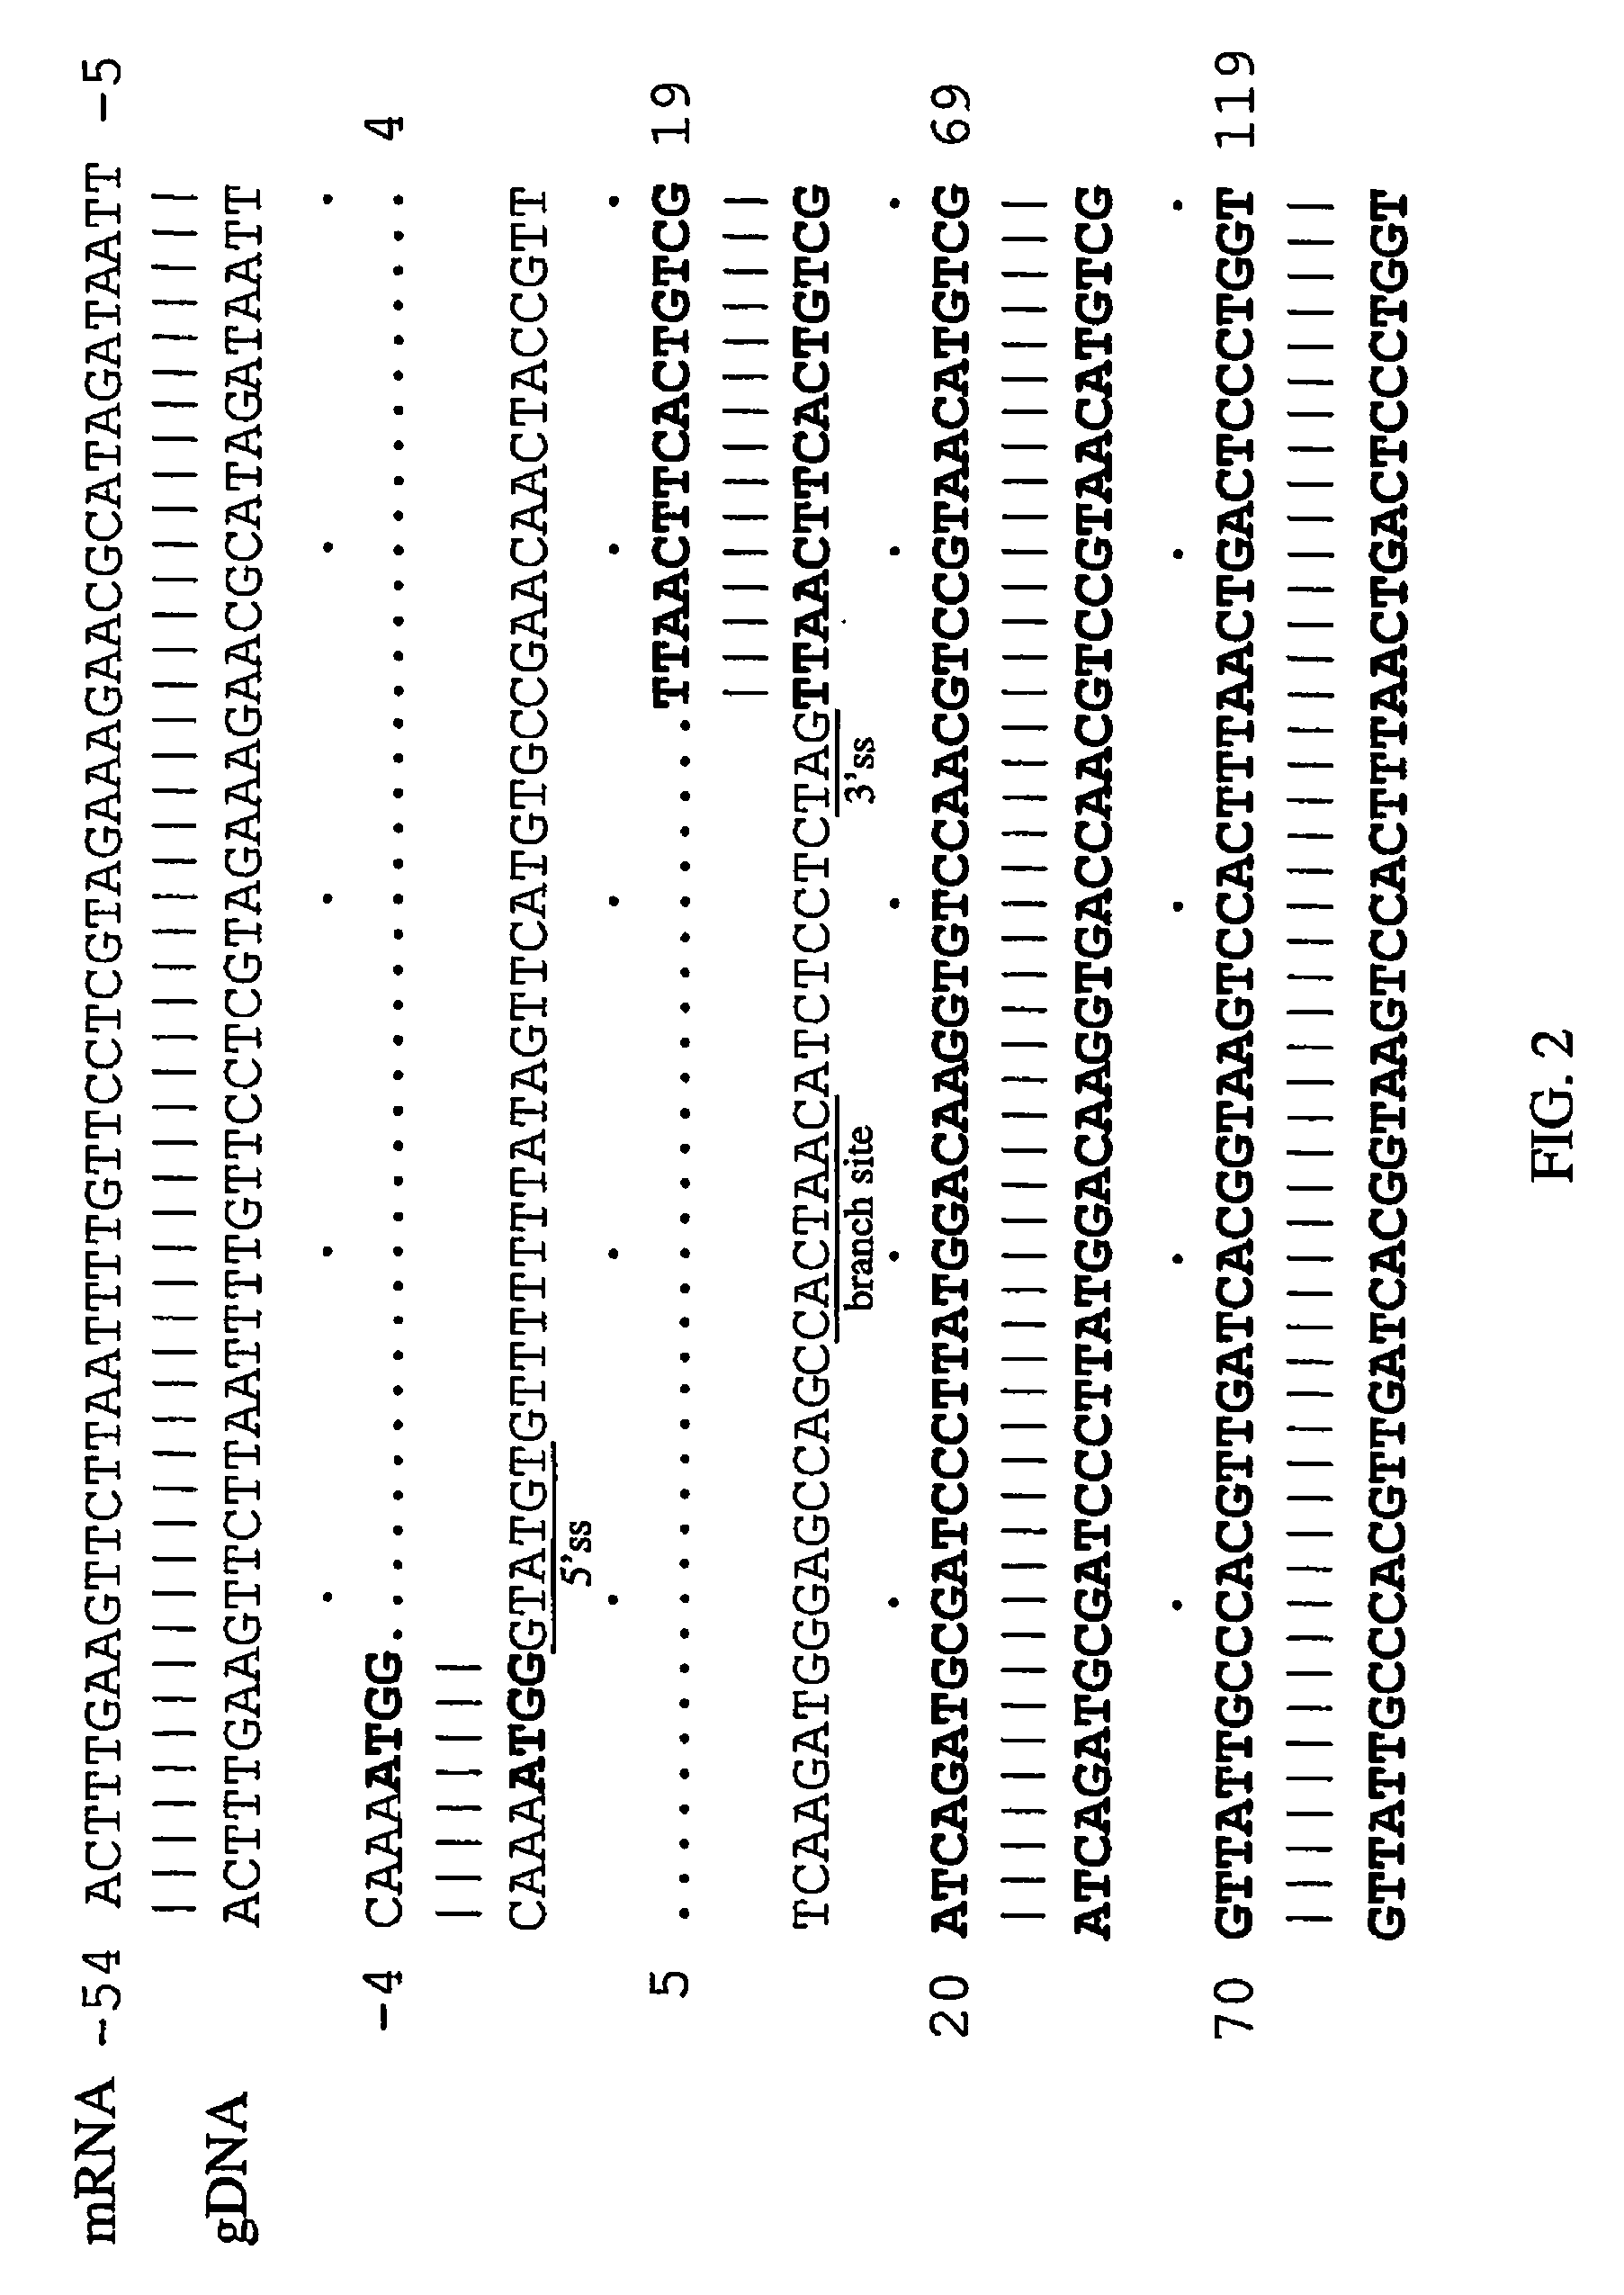 Methods for expression and purification of immunotoxins